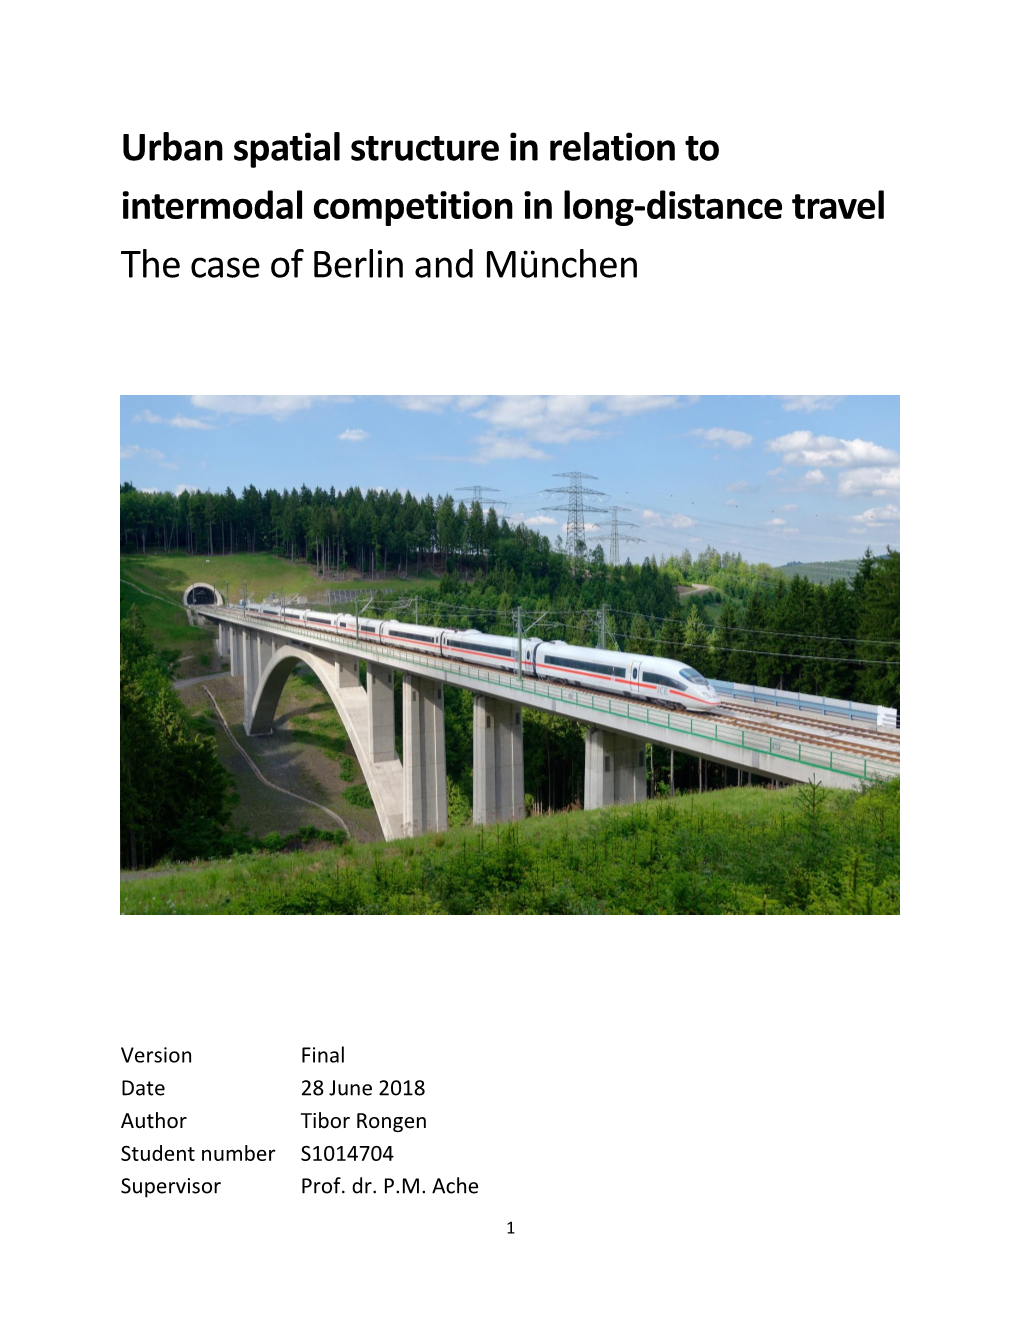 Urban Spatial Structure in Relation to Intermodal Competition in Long-Distance Travel the Case of Berlin and München